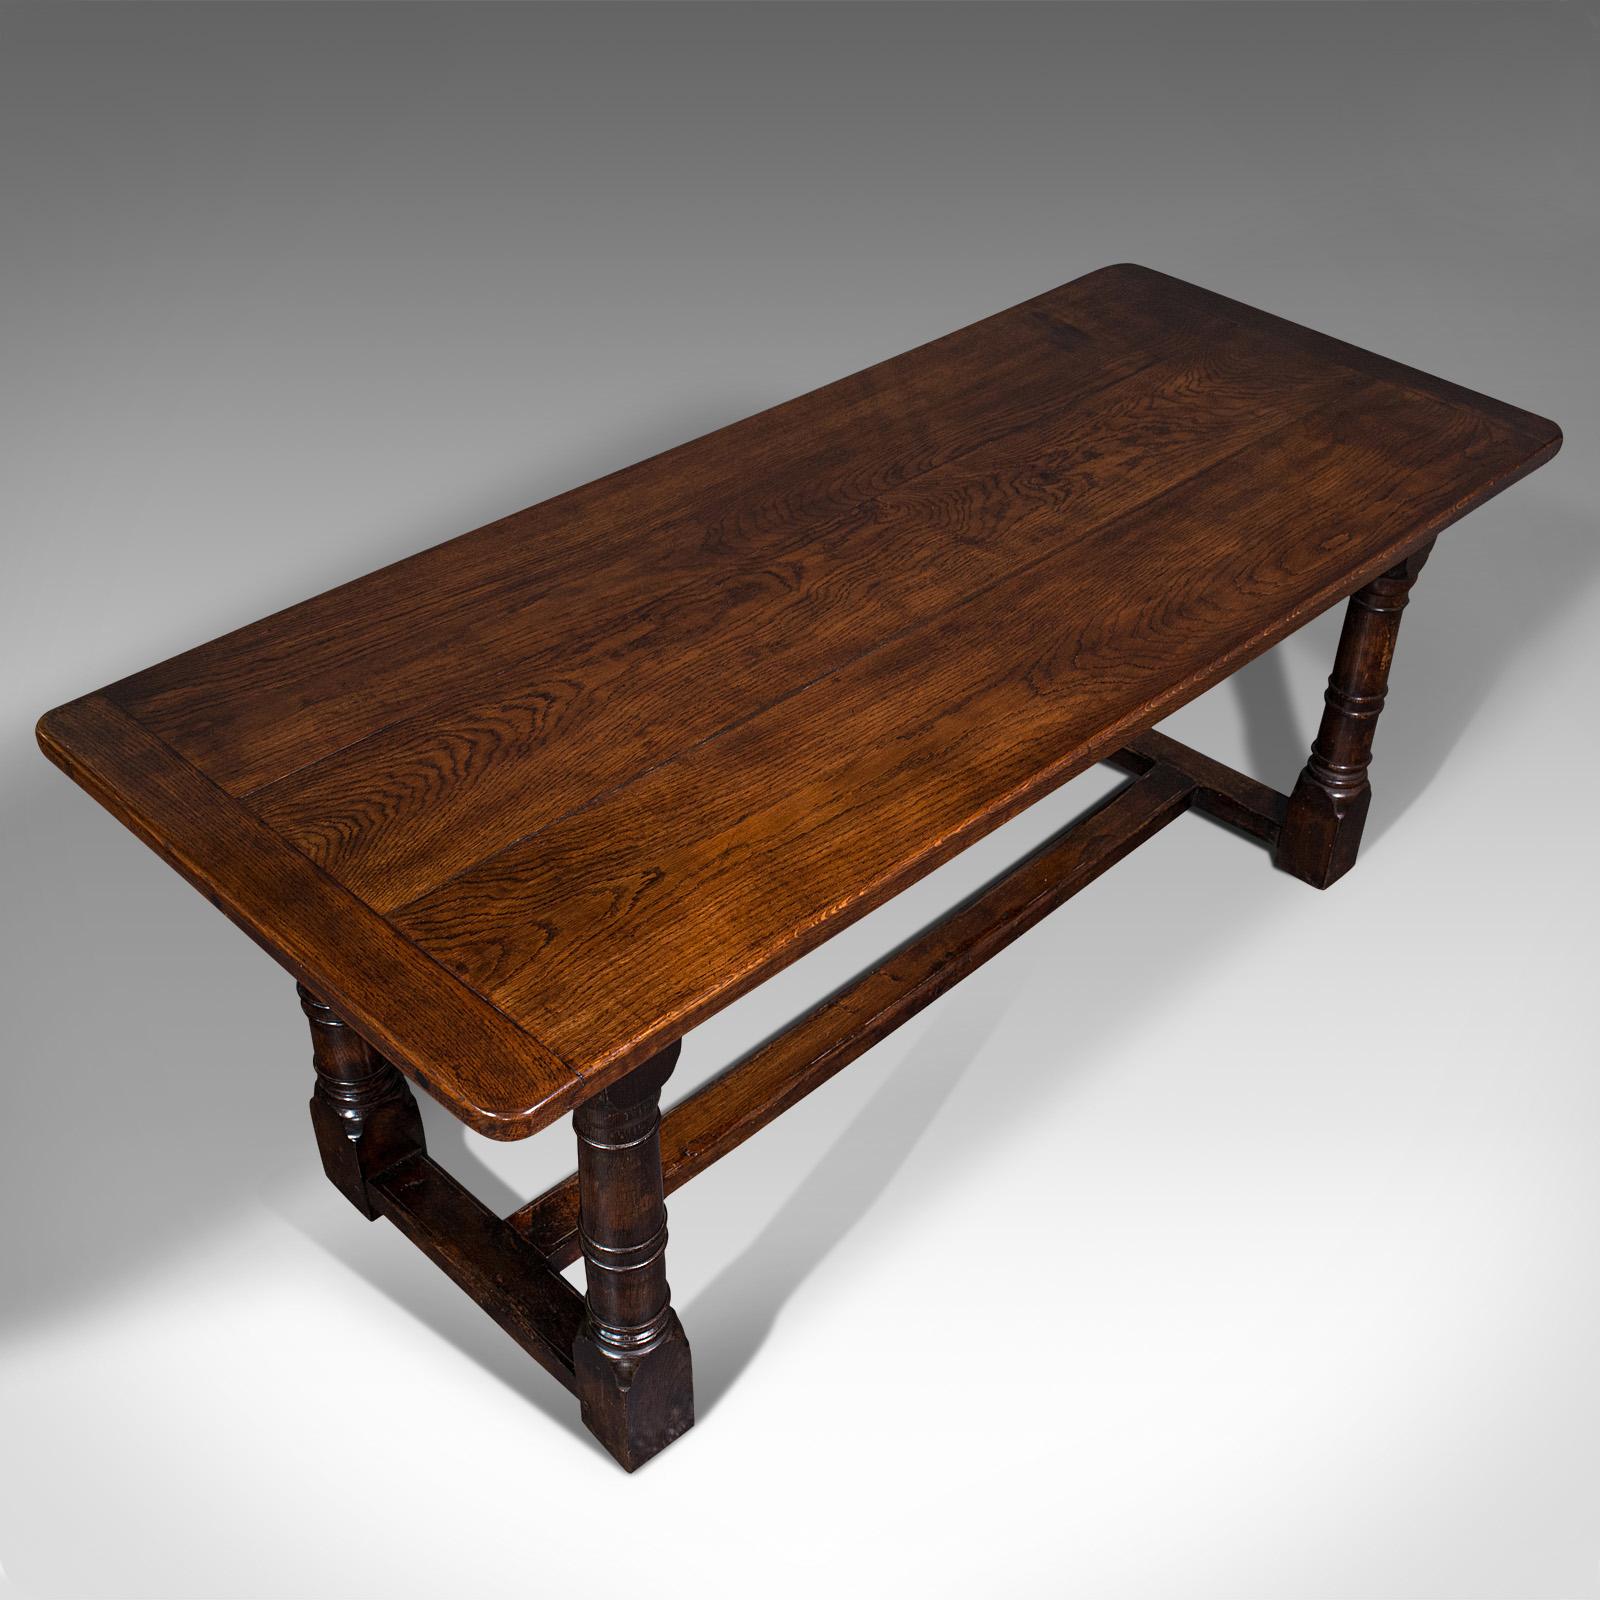 19th Century Antique Refectory Table, English, Oak, 6 Seat, Dining, Kitchen, Victorian, 1880